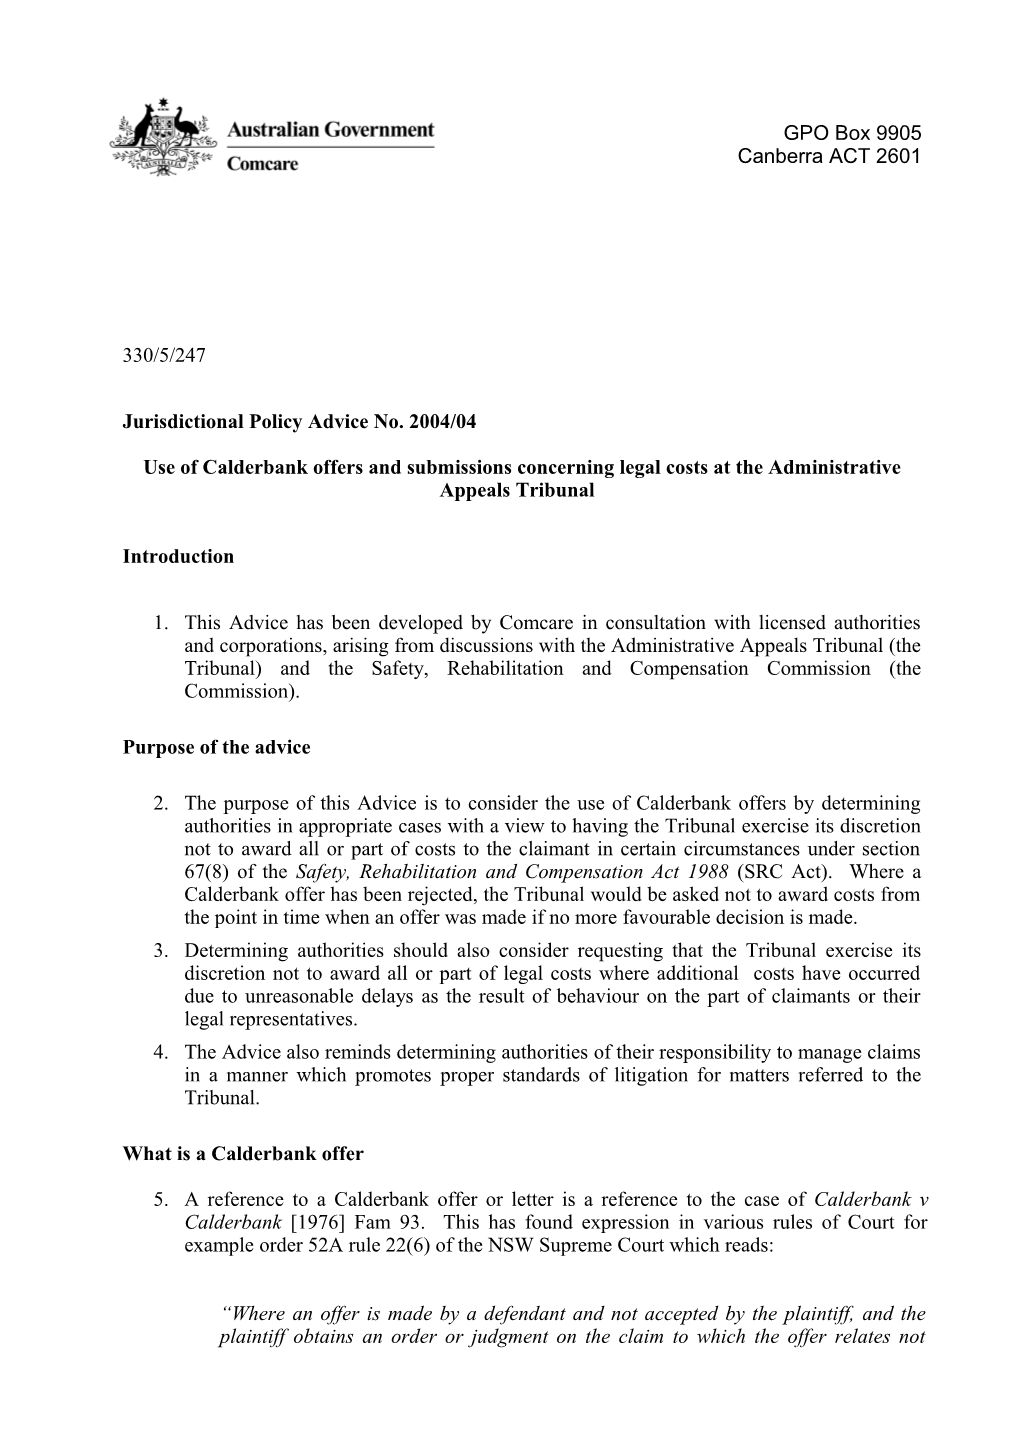 JPA 2004-04 Use of Calderbank Offers & Submissions Concerning Legal Costs - AAT